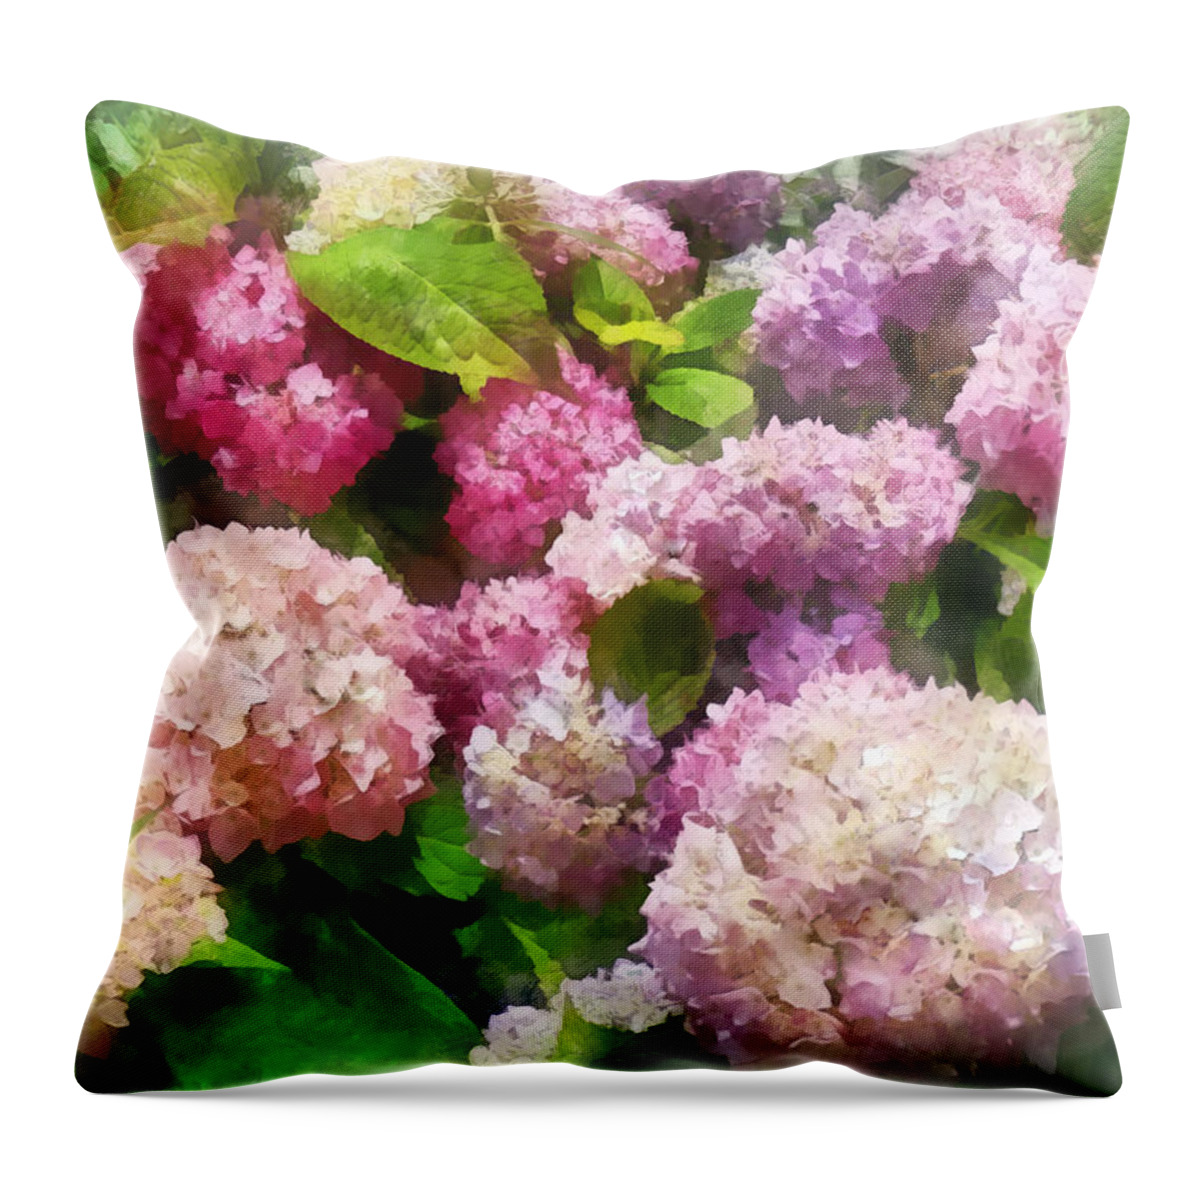 Hydrangea Throw Pillow featuring the photograph Gardens - Pink and Lavender Hydrangea by Susan Savad